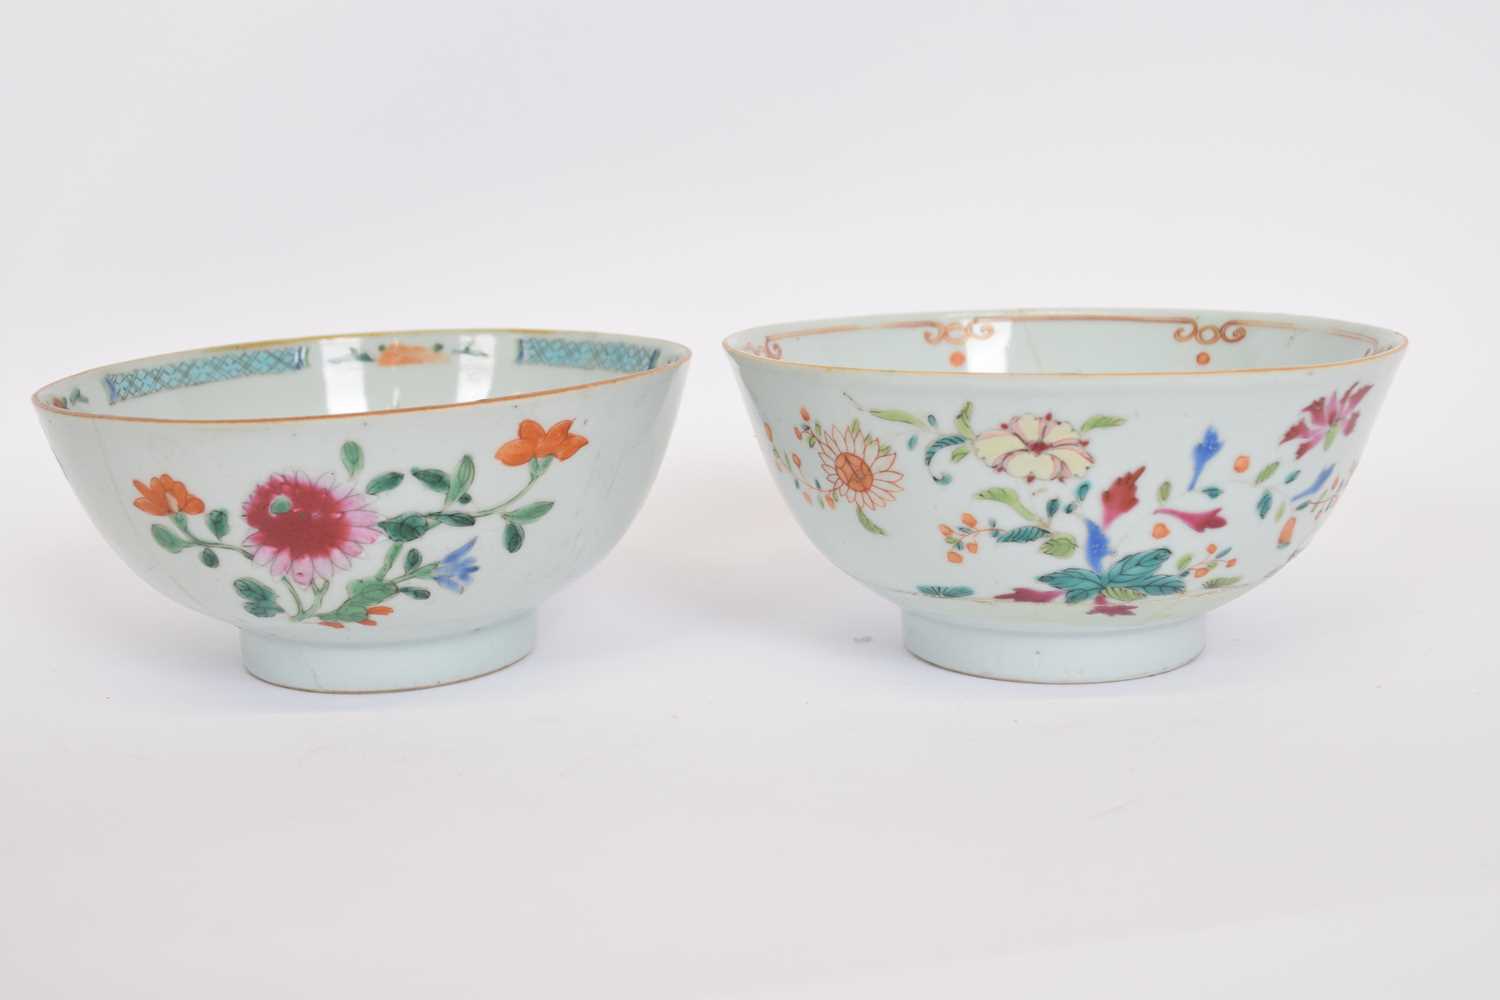 Two Qianlong period bowls with blue and white enamelled designs, mainly of flowers, some in